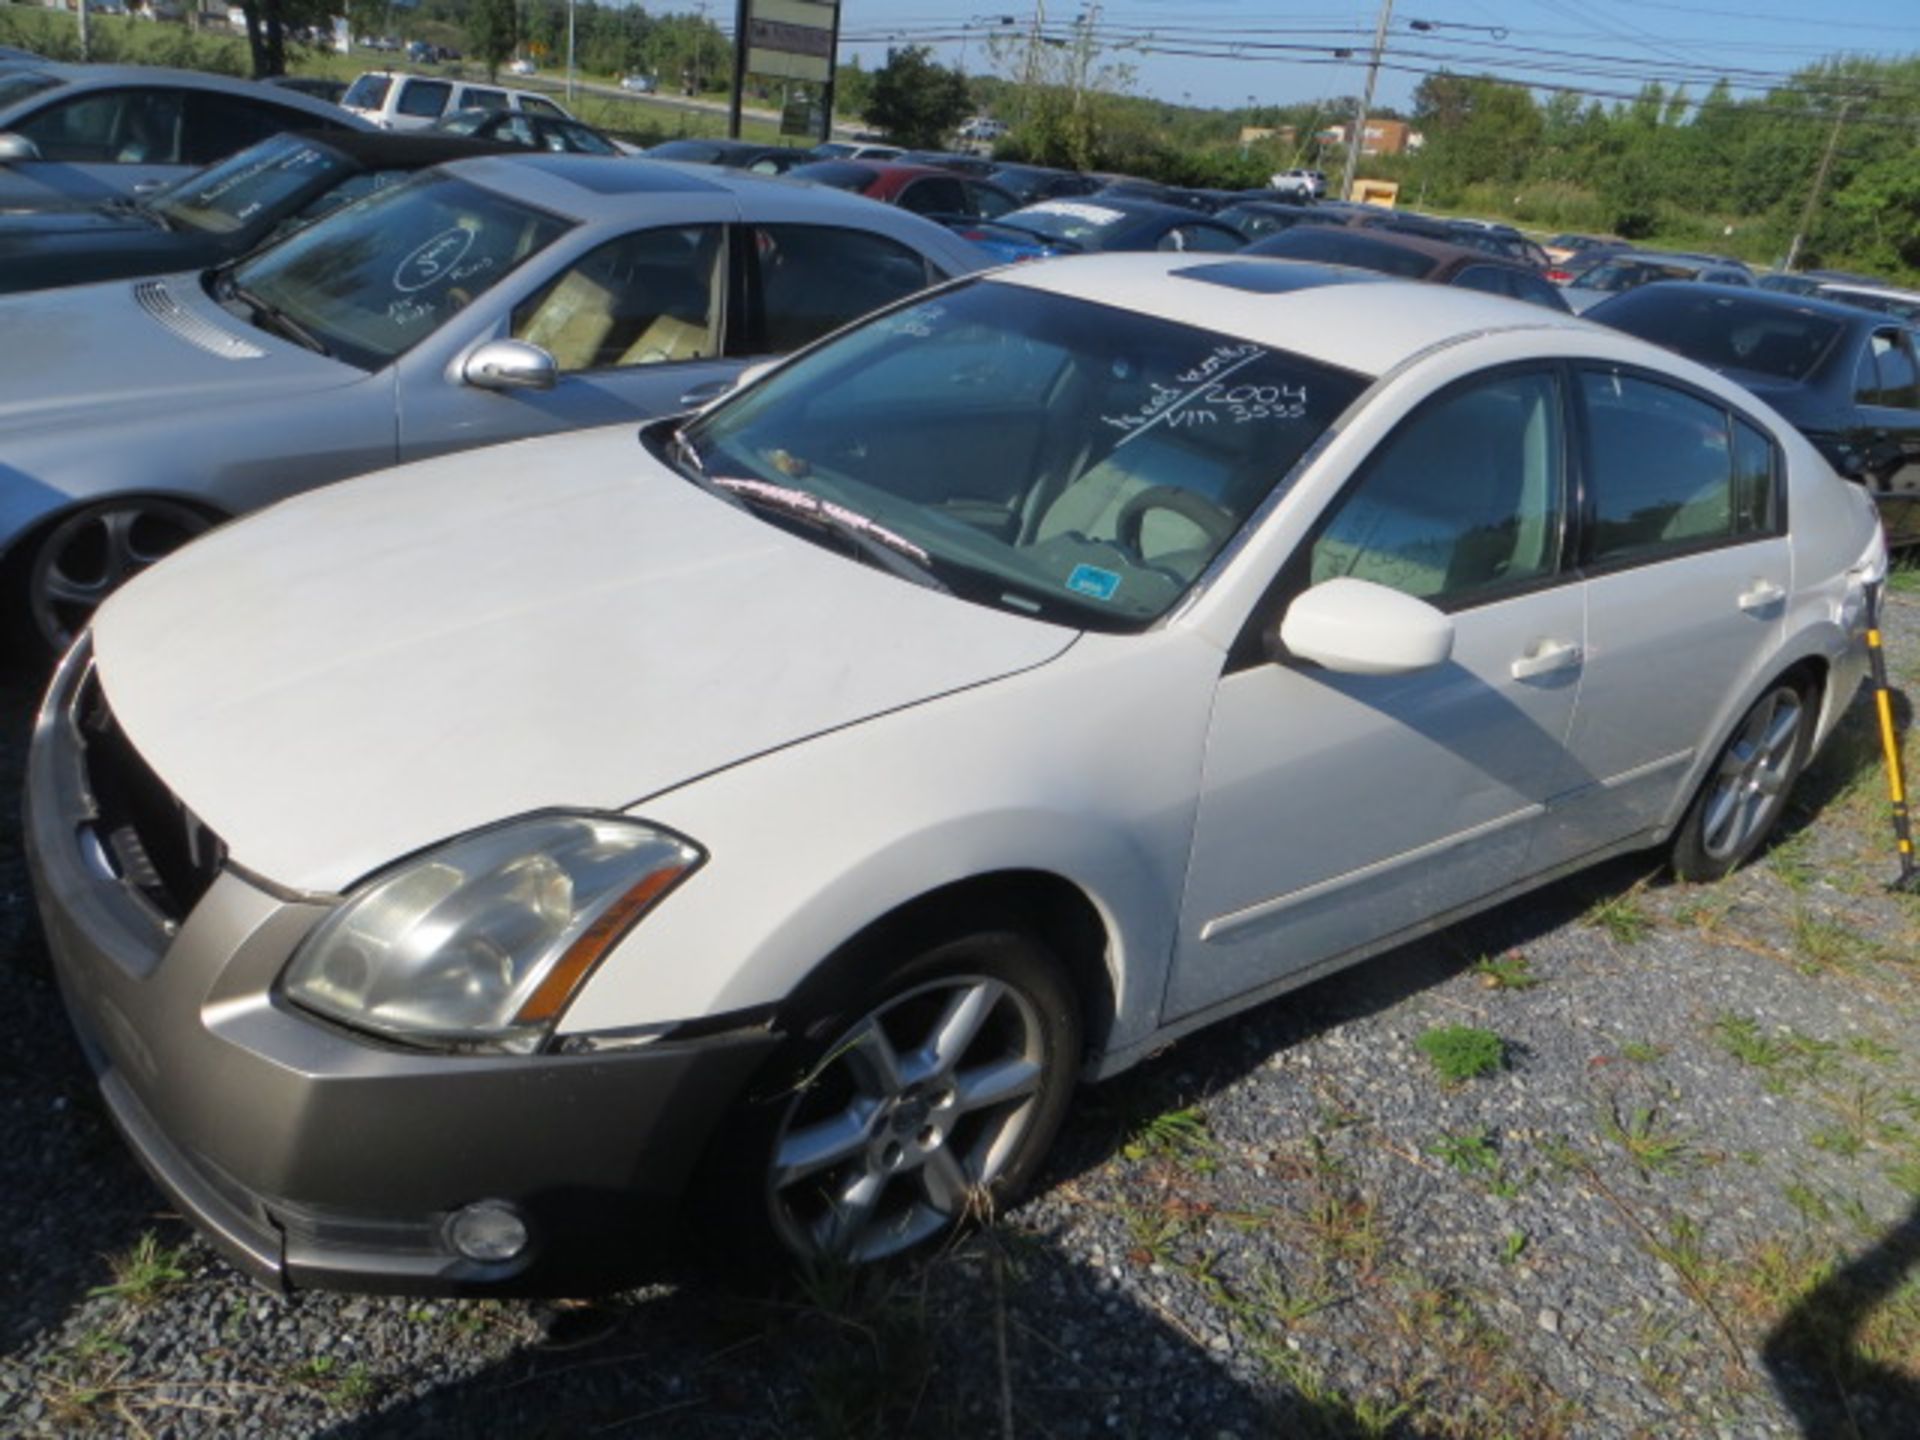 2005 Nissan Maxima-NEEDS WORK & GRILL 127000 MILES,VIN 1N4BA41E05C813535, SOLD W/ GOOD TRANSFERABLE - Image 2 of 3